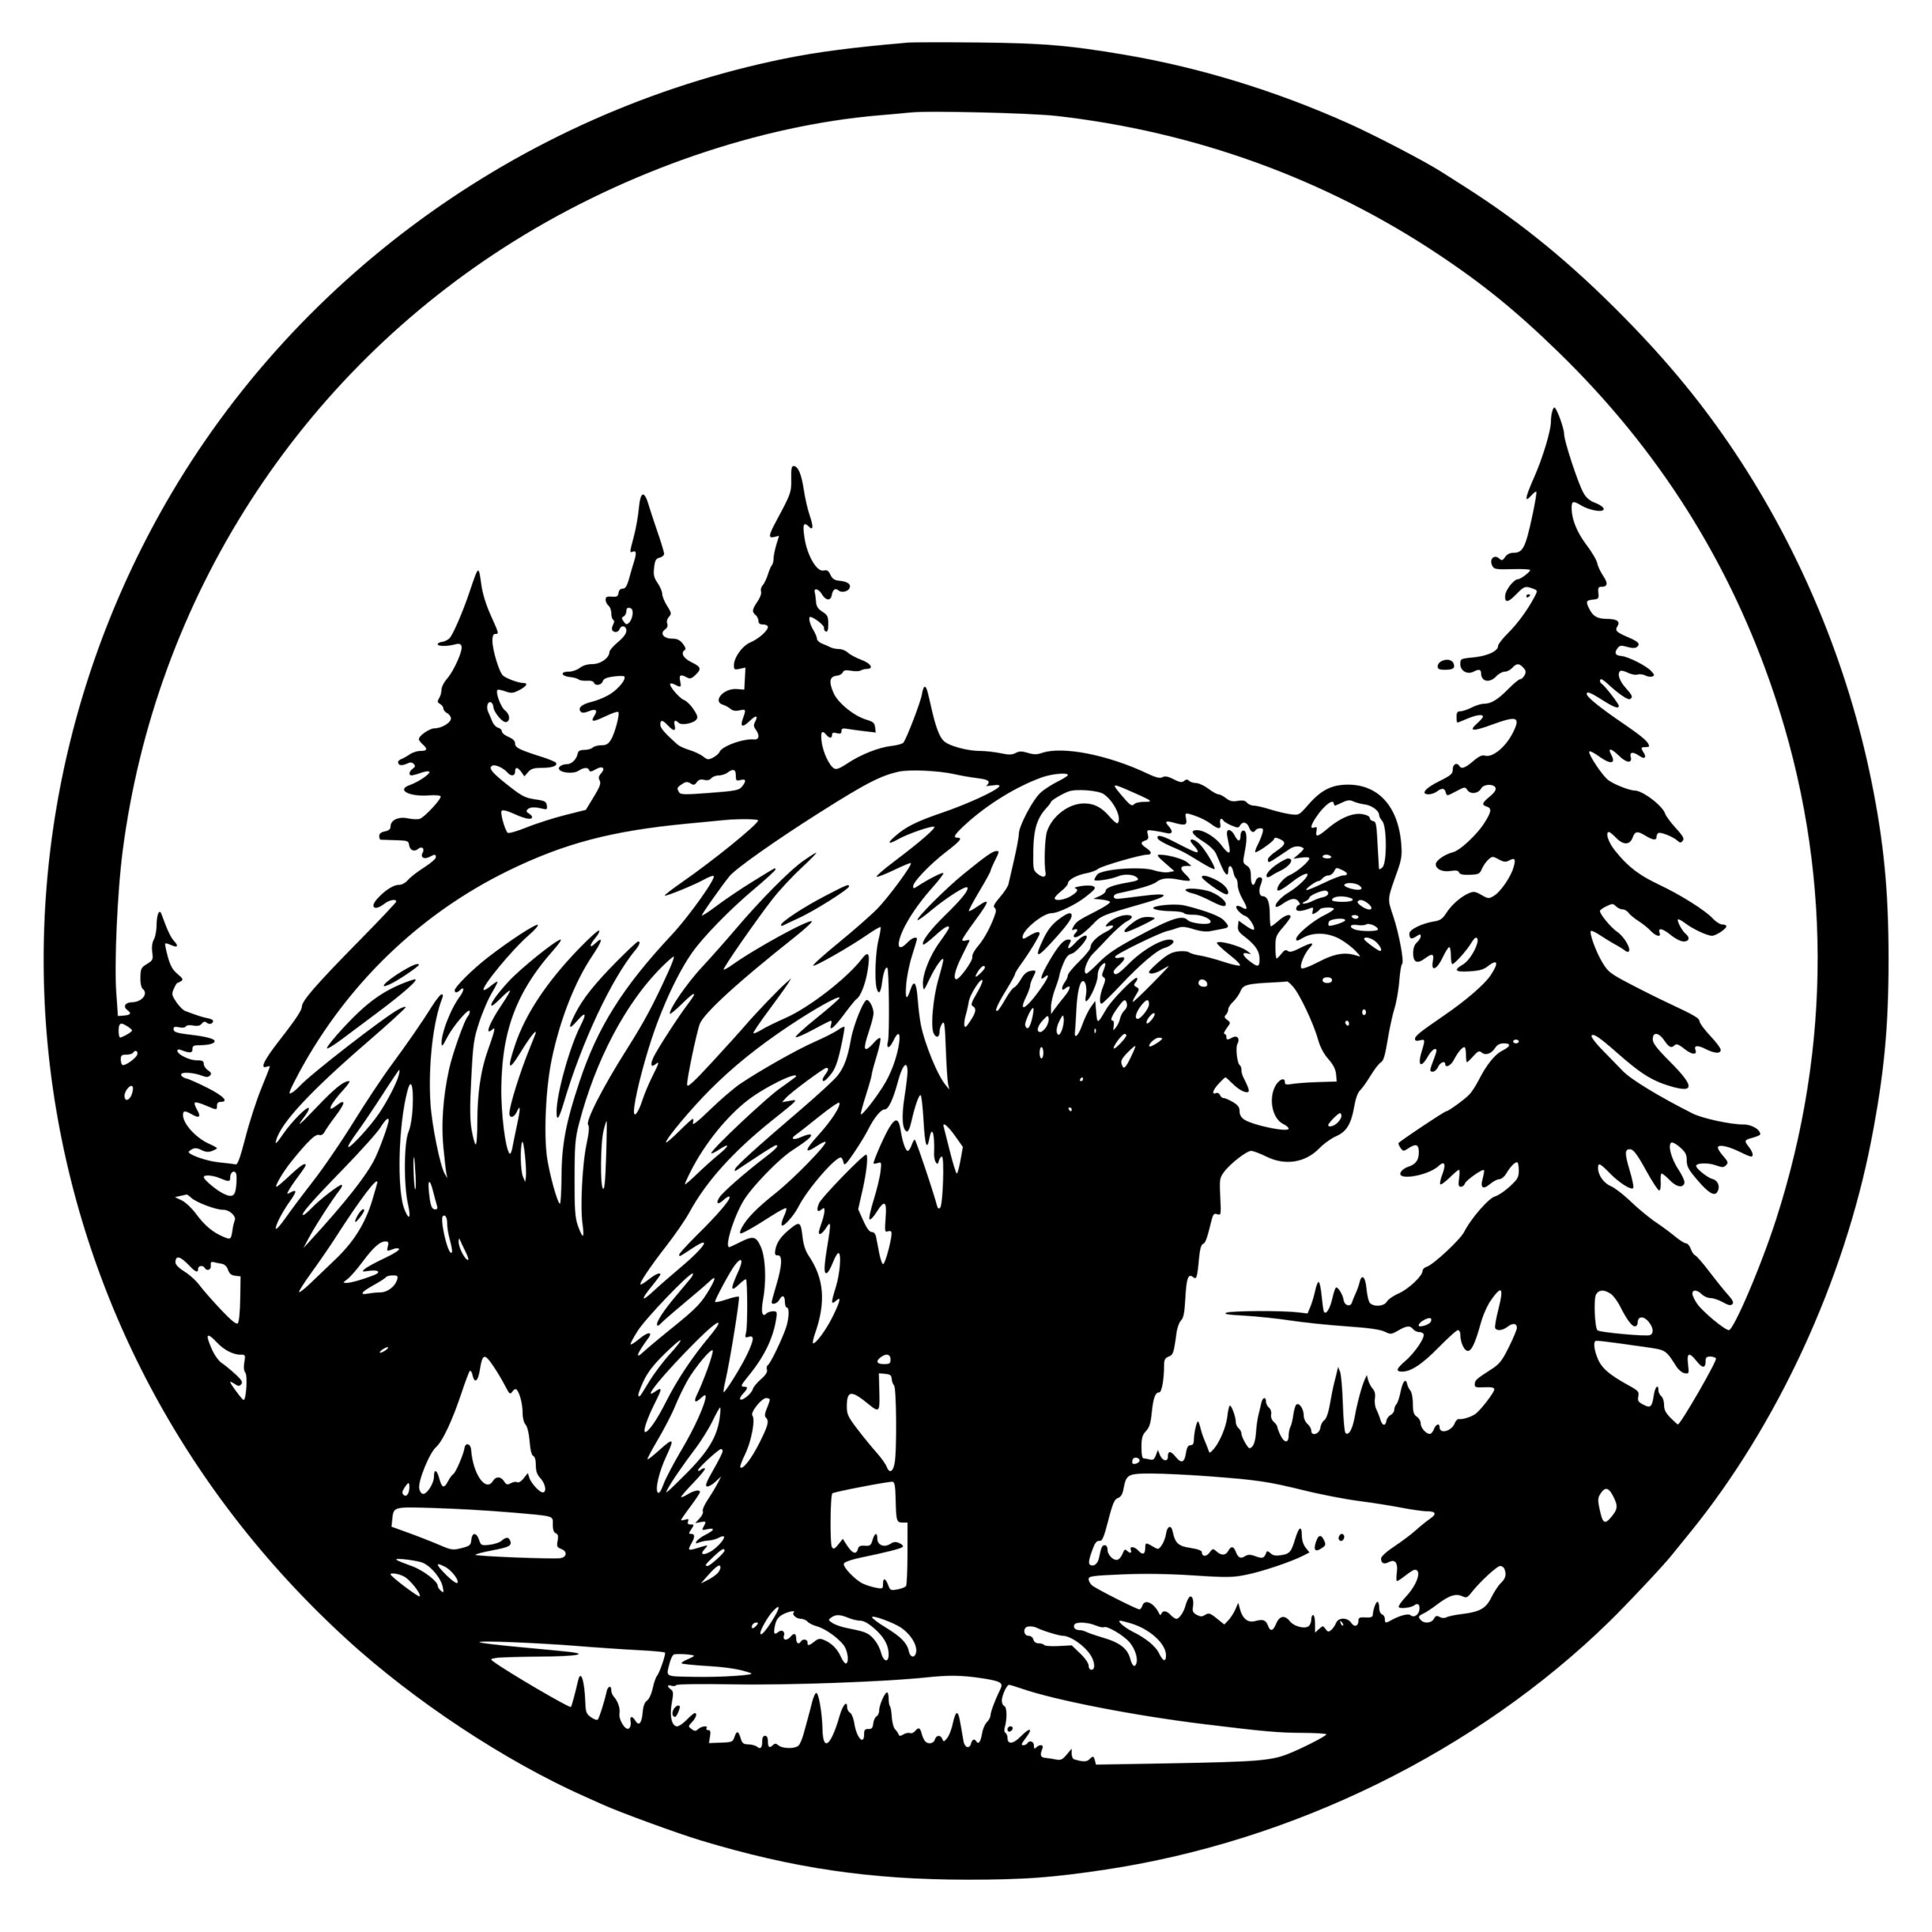 Forest Dwelling Bear: SVG File for Cricut, Silhouette, Laser Machines